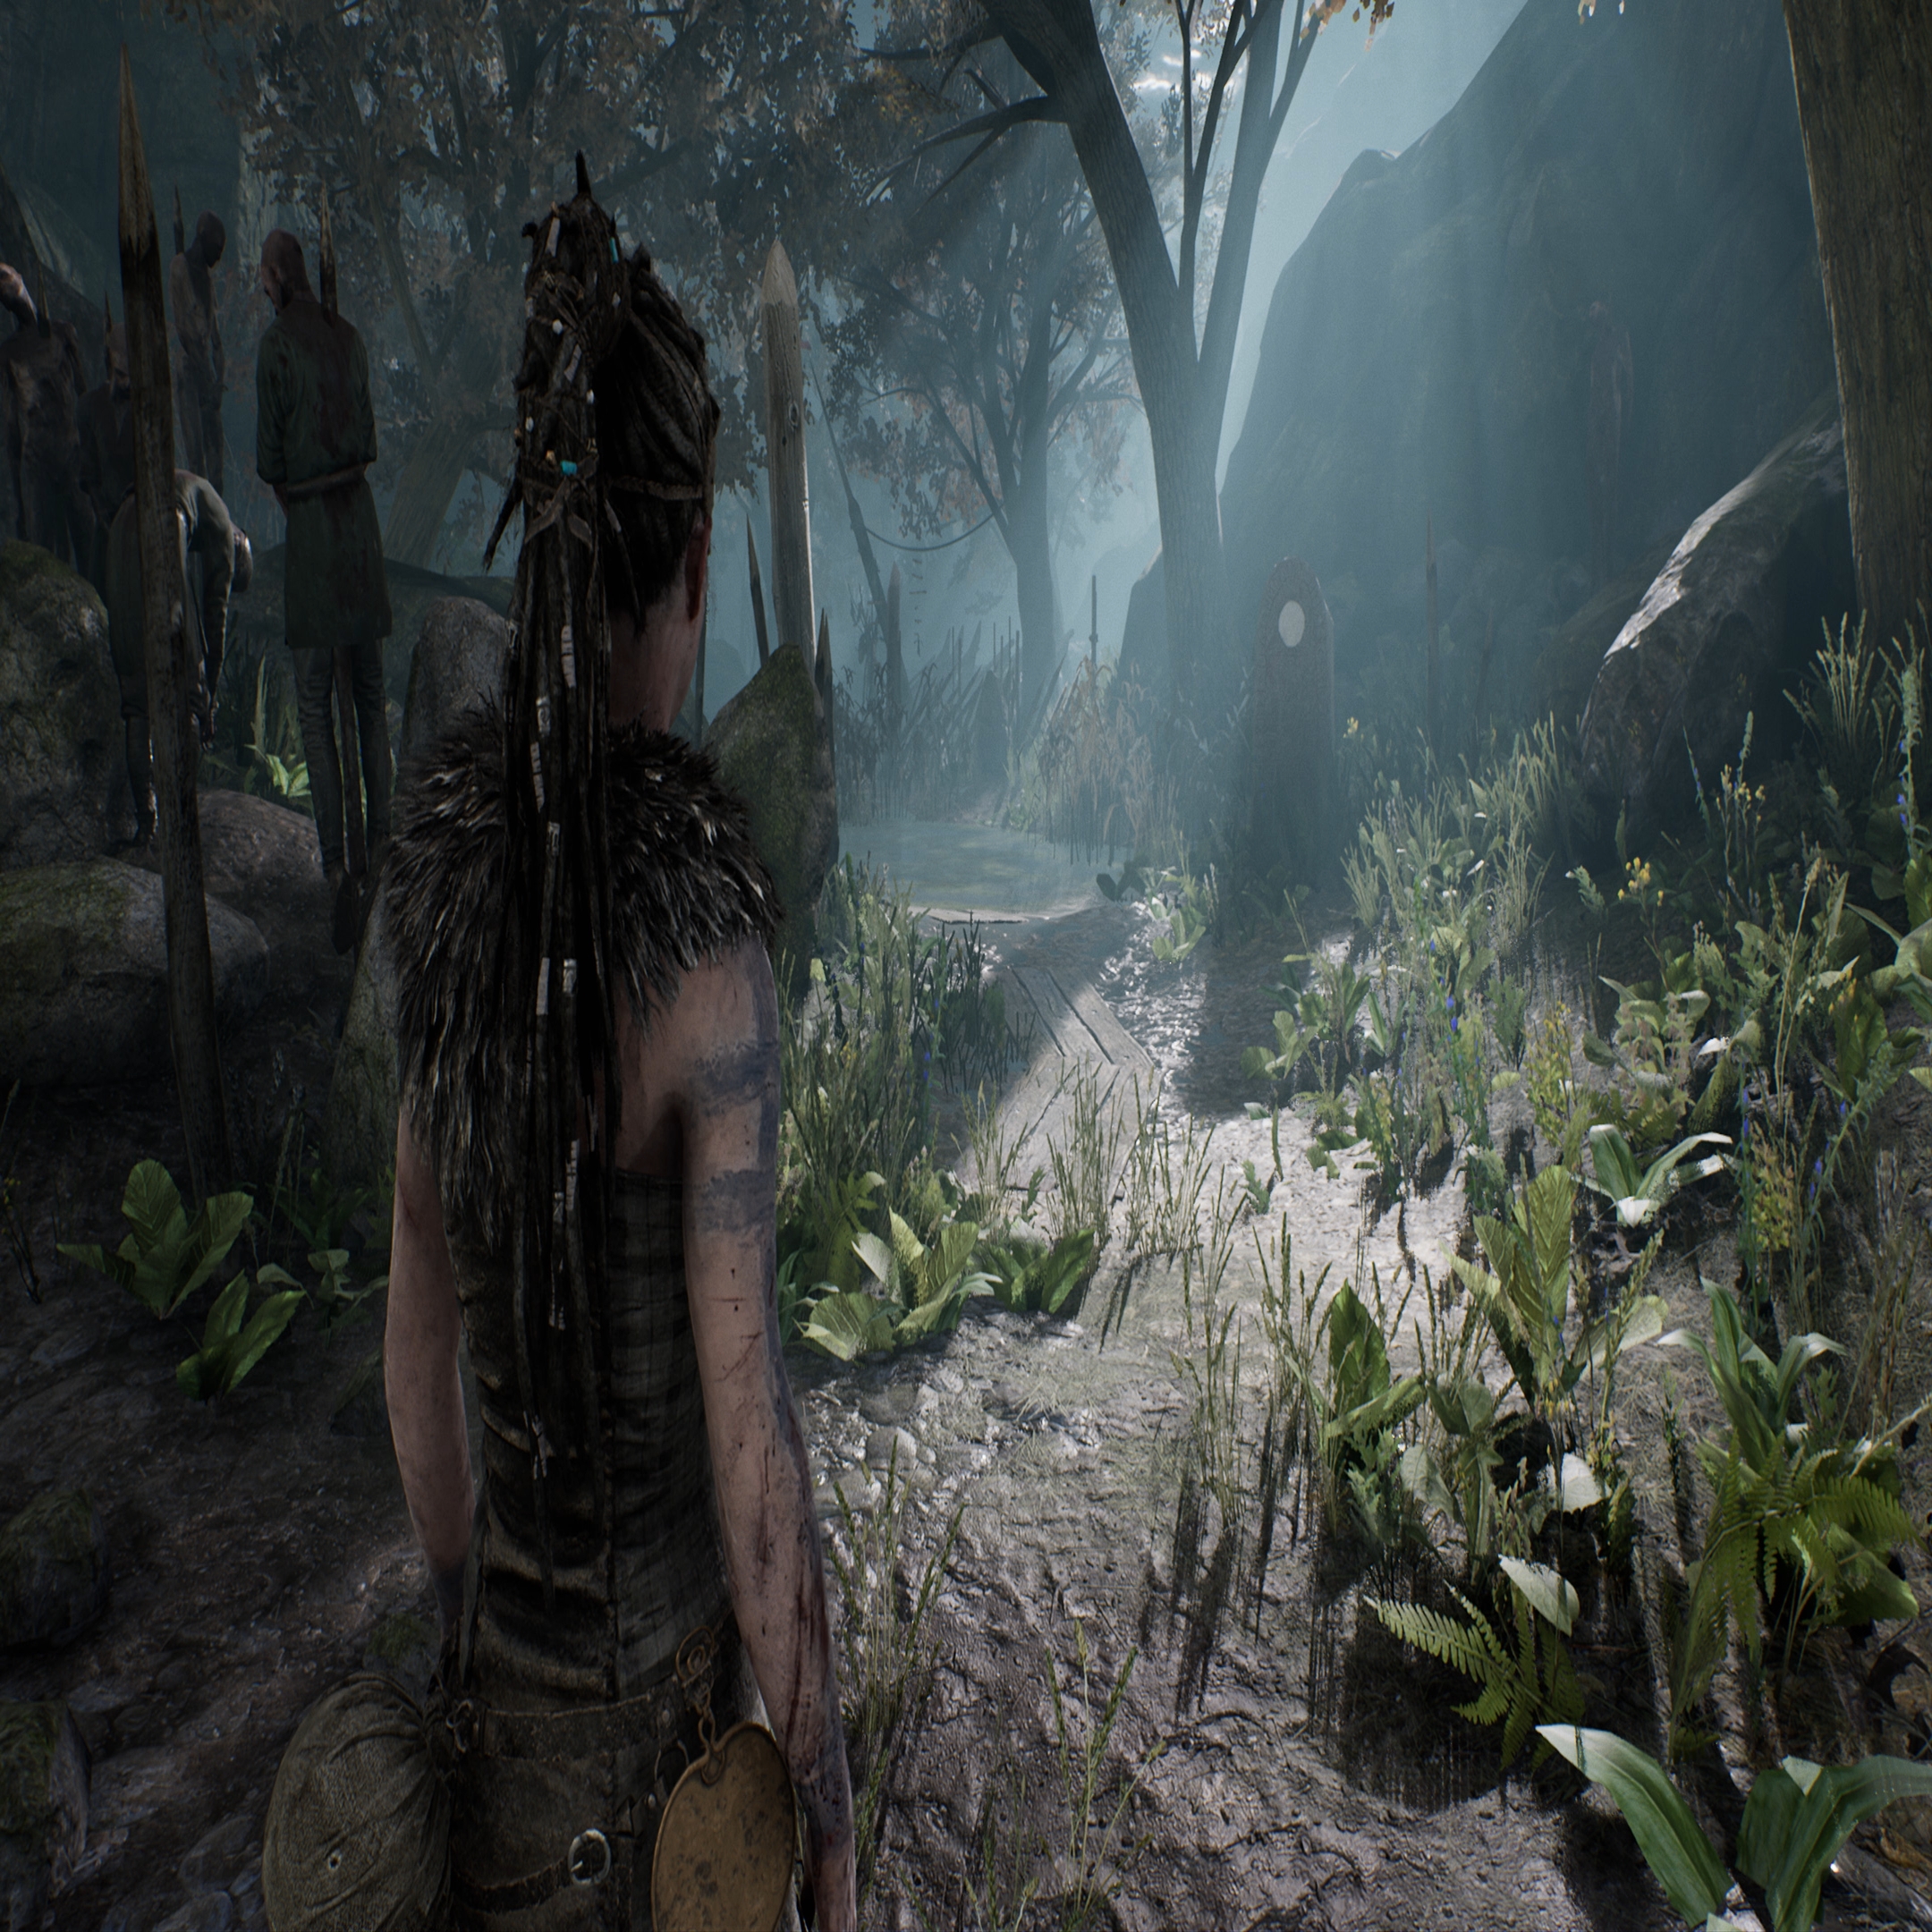 Hellblade 2 stuns audiences at the Xbox Games Showcase - Xfire